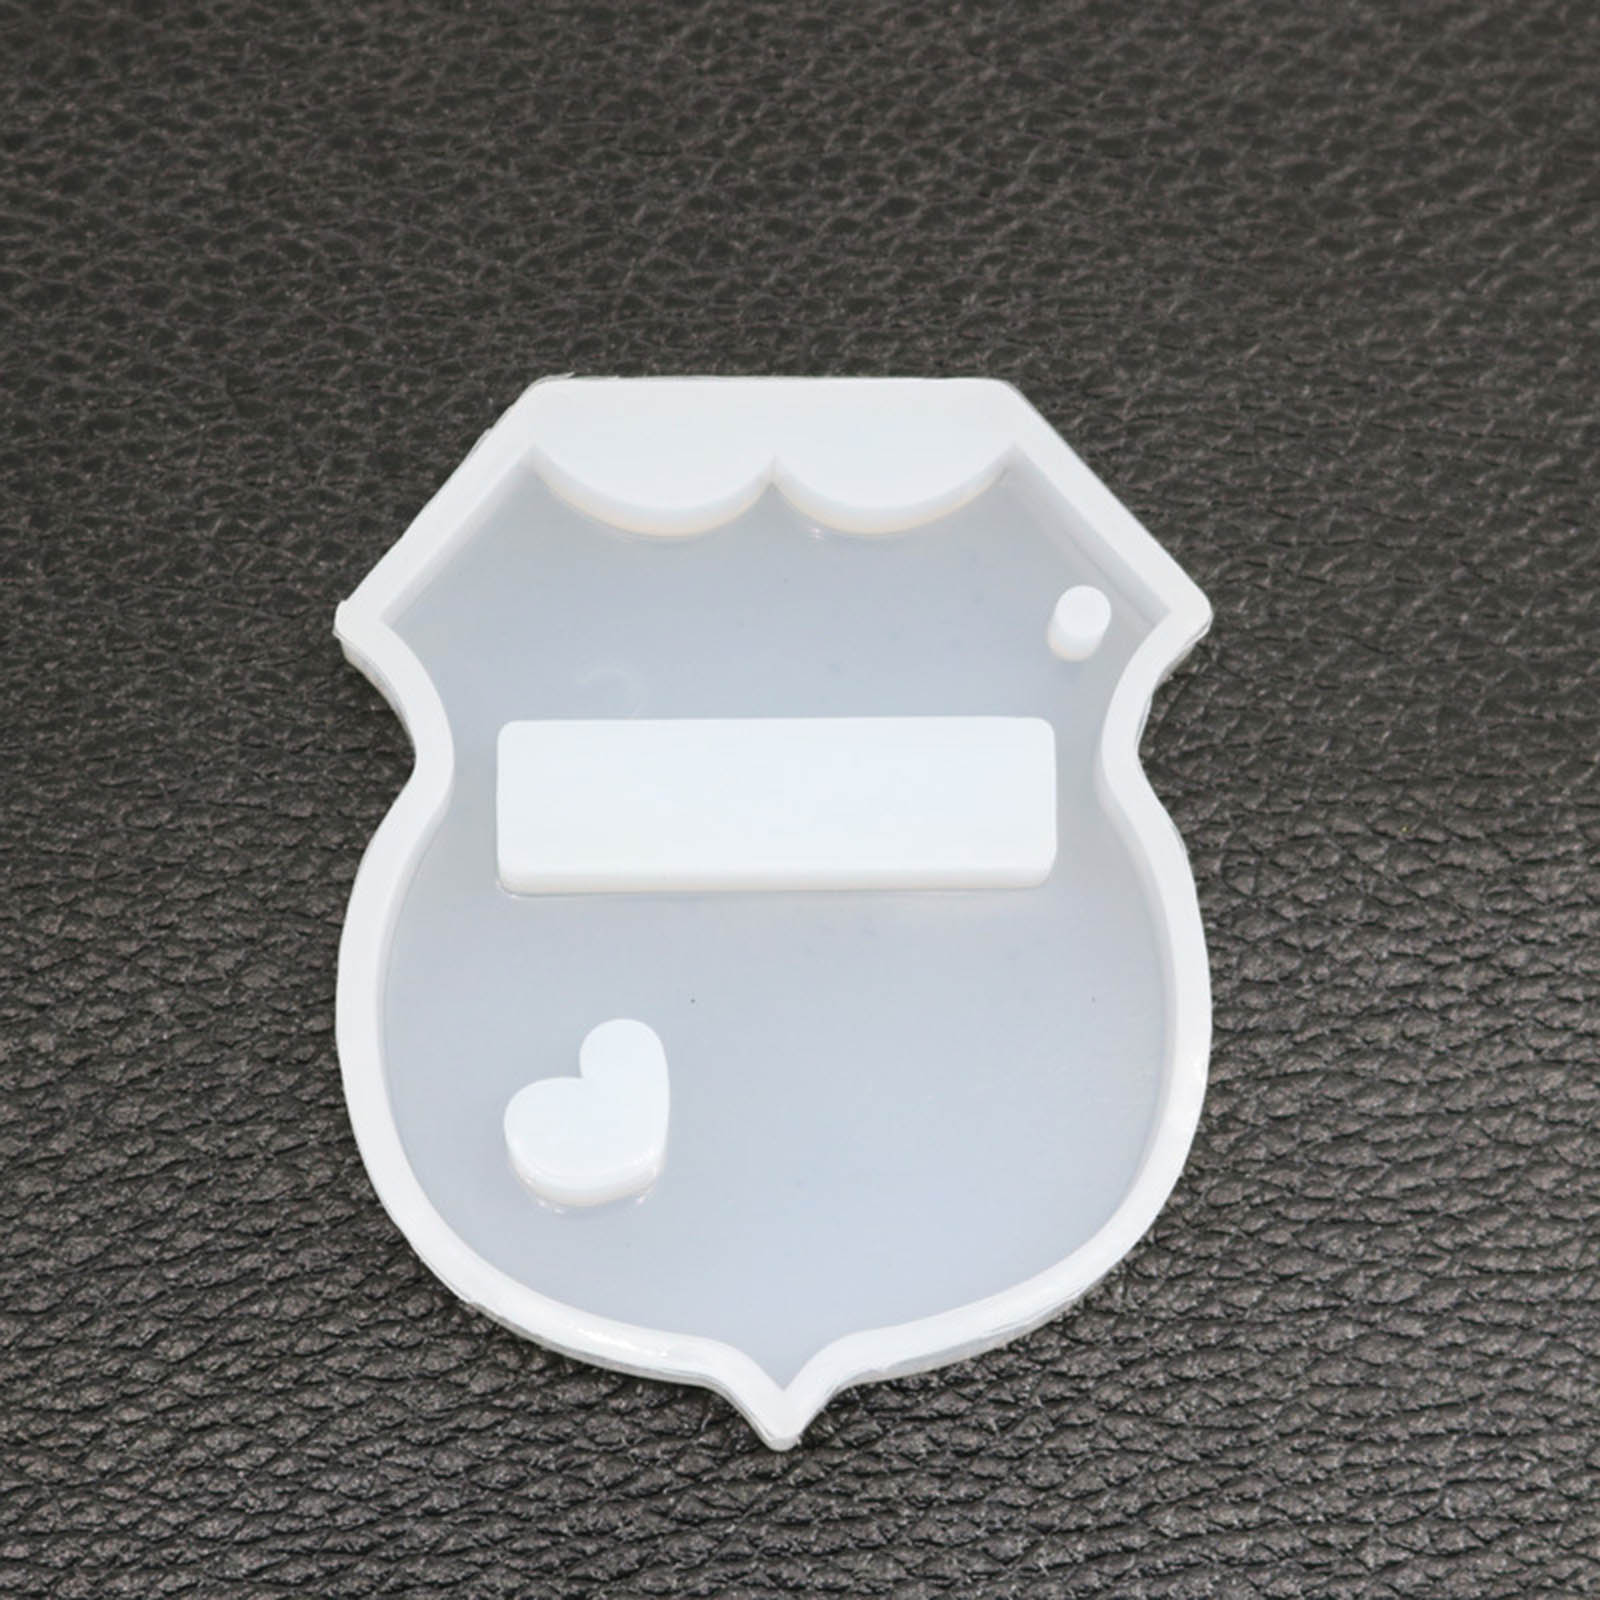 Picture of Silicone Resin Mold For Jewelry Making Pendant Skirt White 5.6cm x 4.5cm, 1 Piece